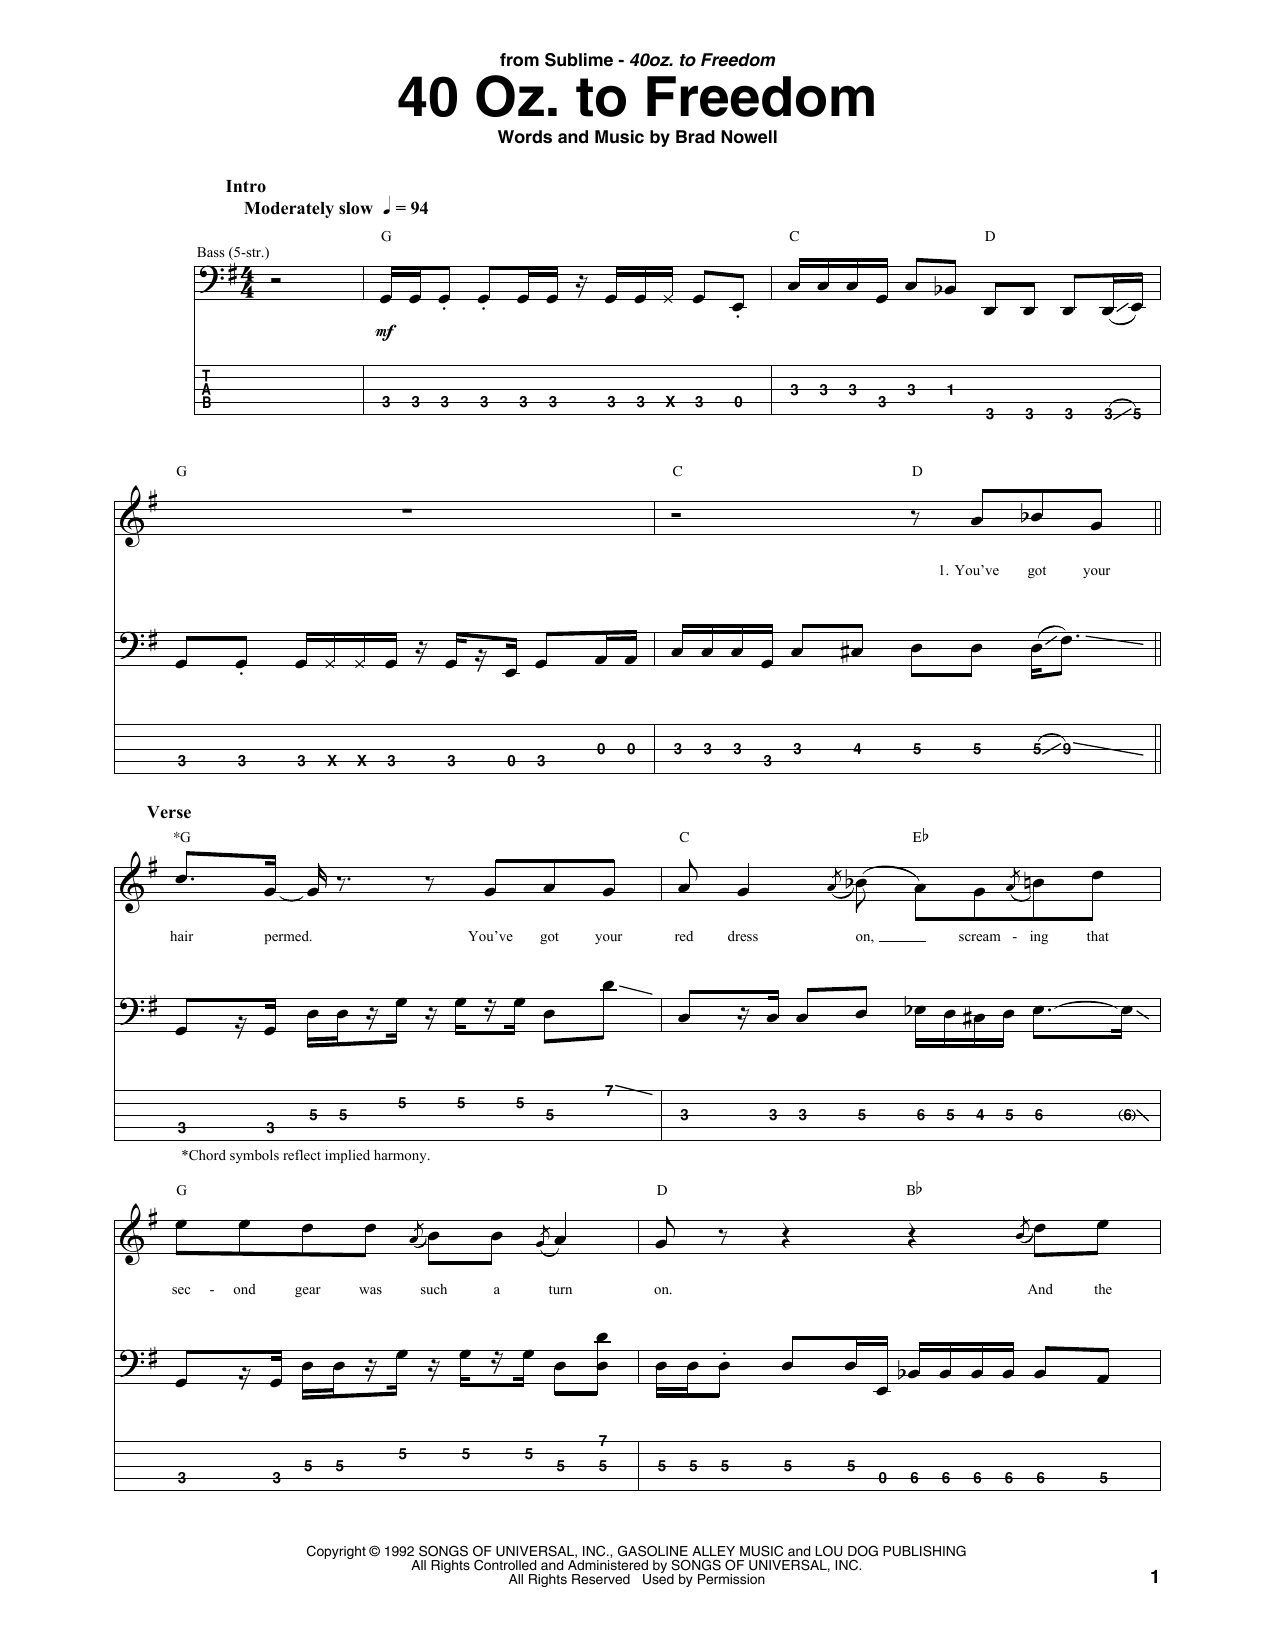 Download Sublime 40 Oz. To Freedom Sheet Music